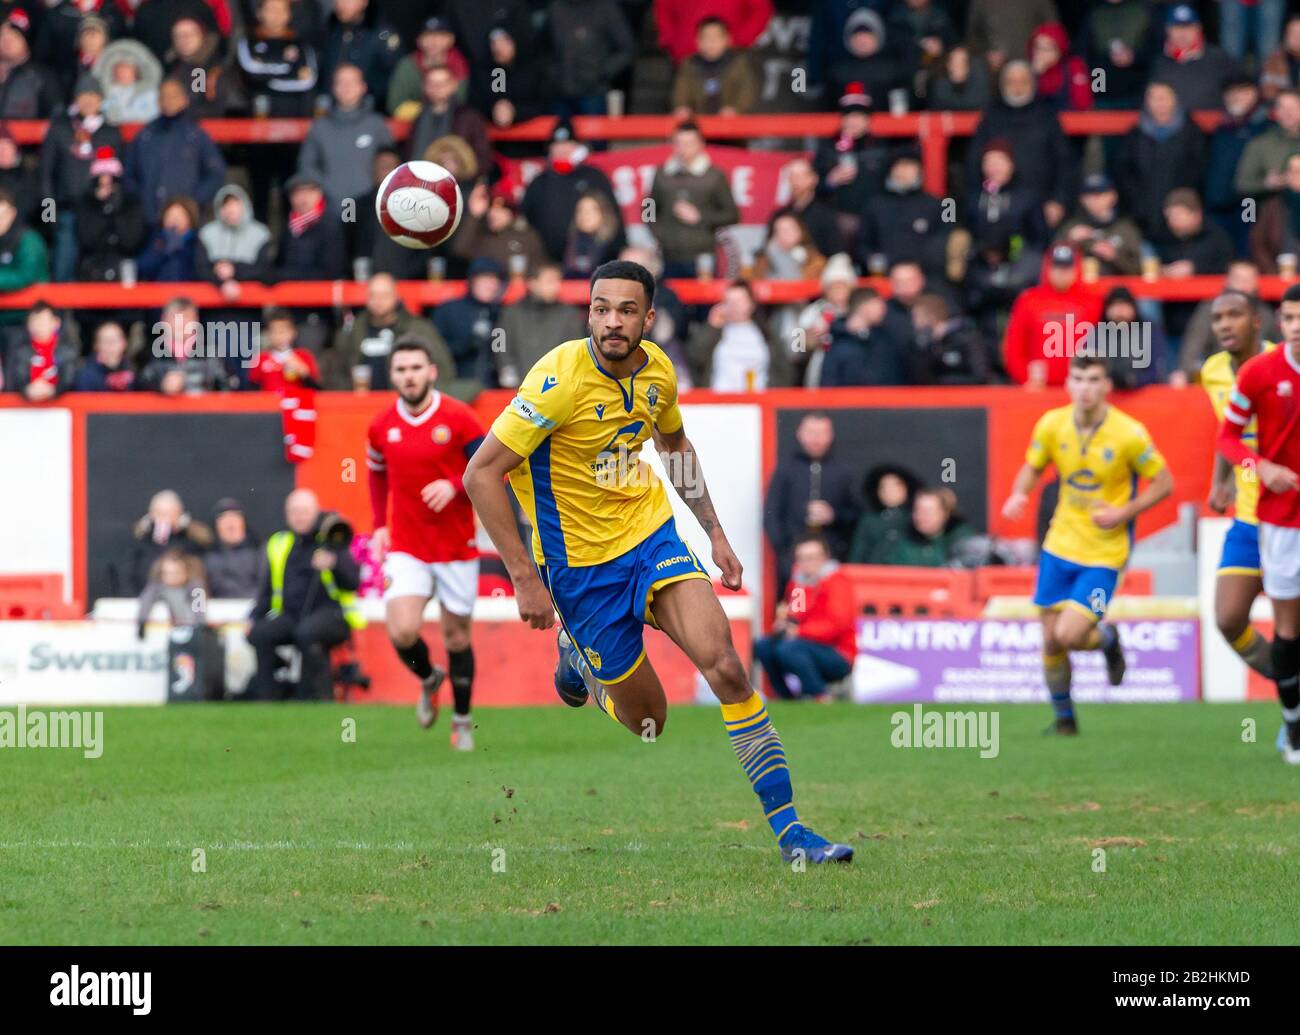 Warrington's Jordan Buckley chases the ball whilst attacking the FCUM goal Stock Photo